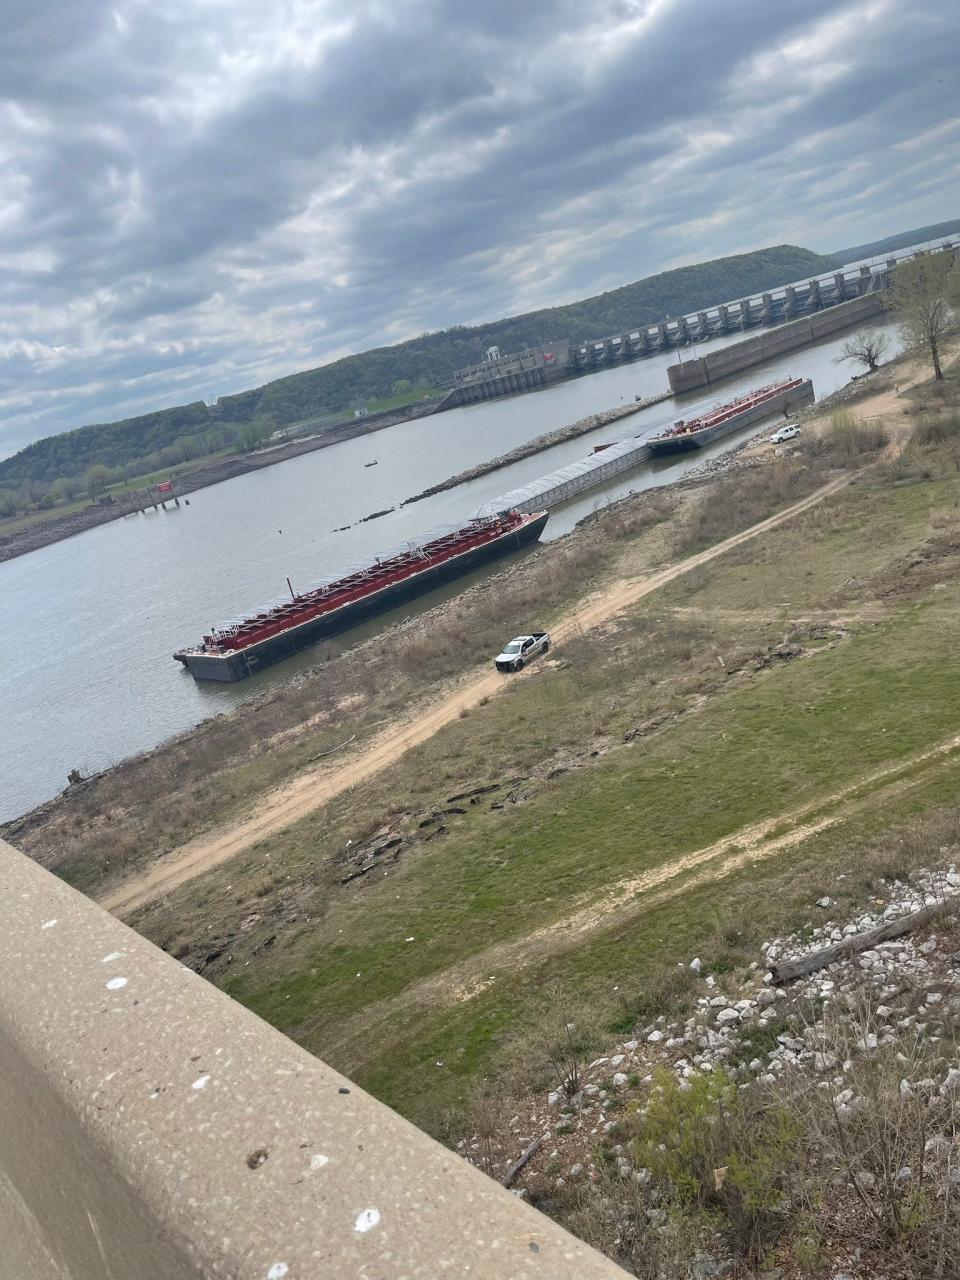 U.S. Highway 59 south of Sallisaw was shut down on Saturday after a barge struck a bridge at the Kerr Reservoir, according to Oklahoma Highway Patrol.